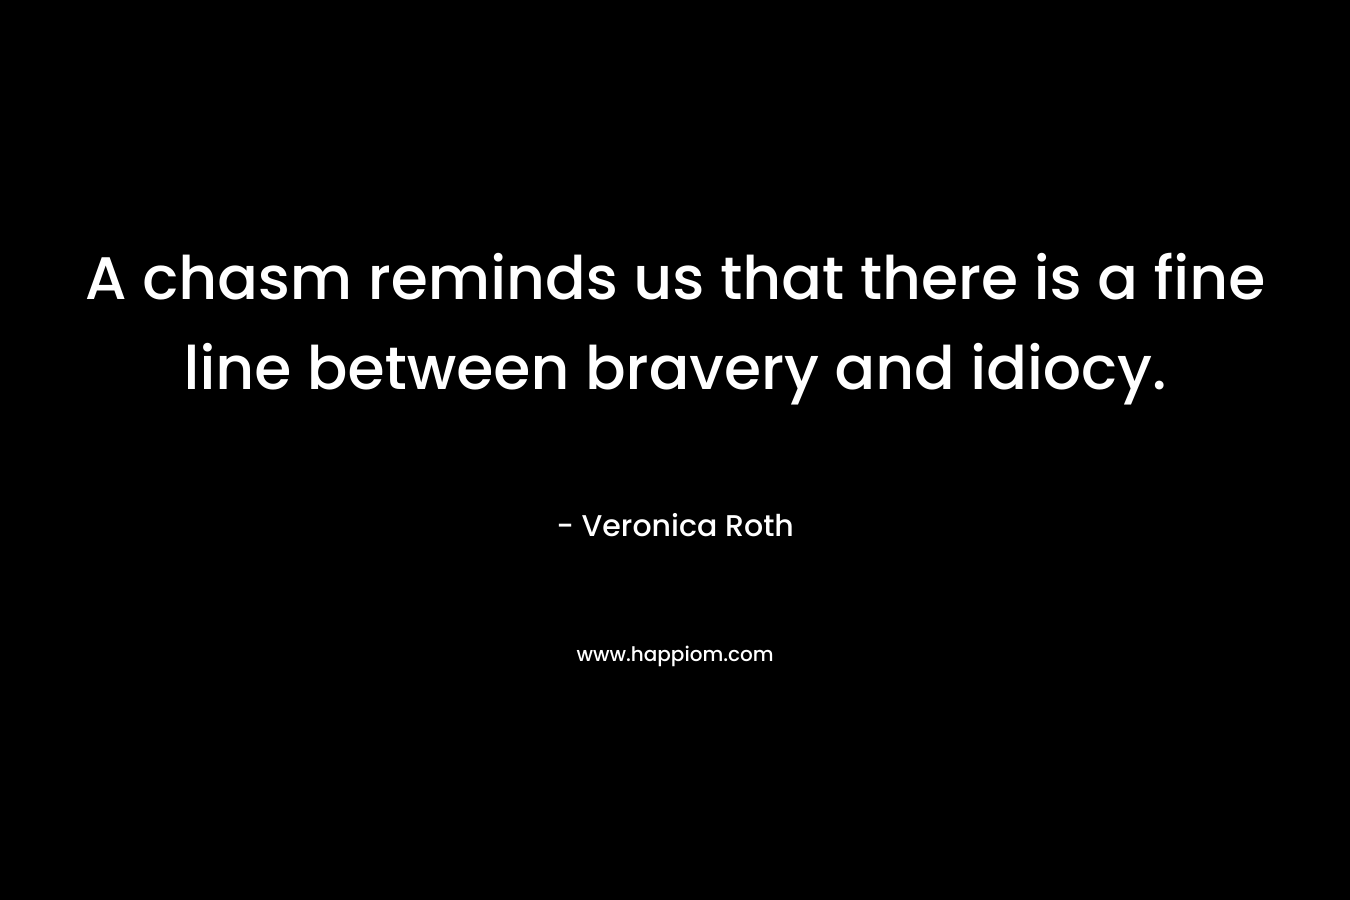 A chasm reminds us that there is a fine line between bravery and idiocy. – Veronica Roth